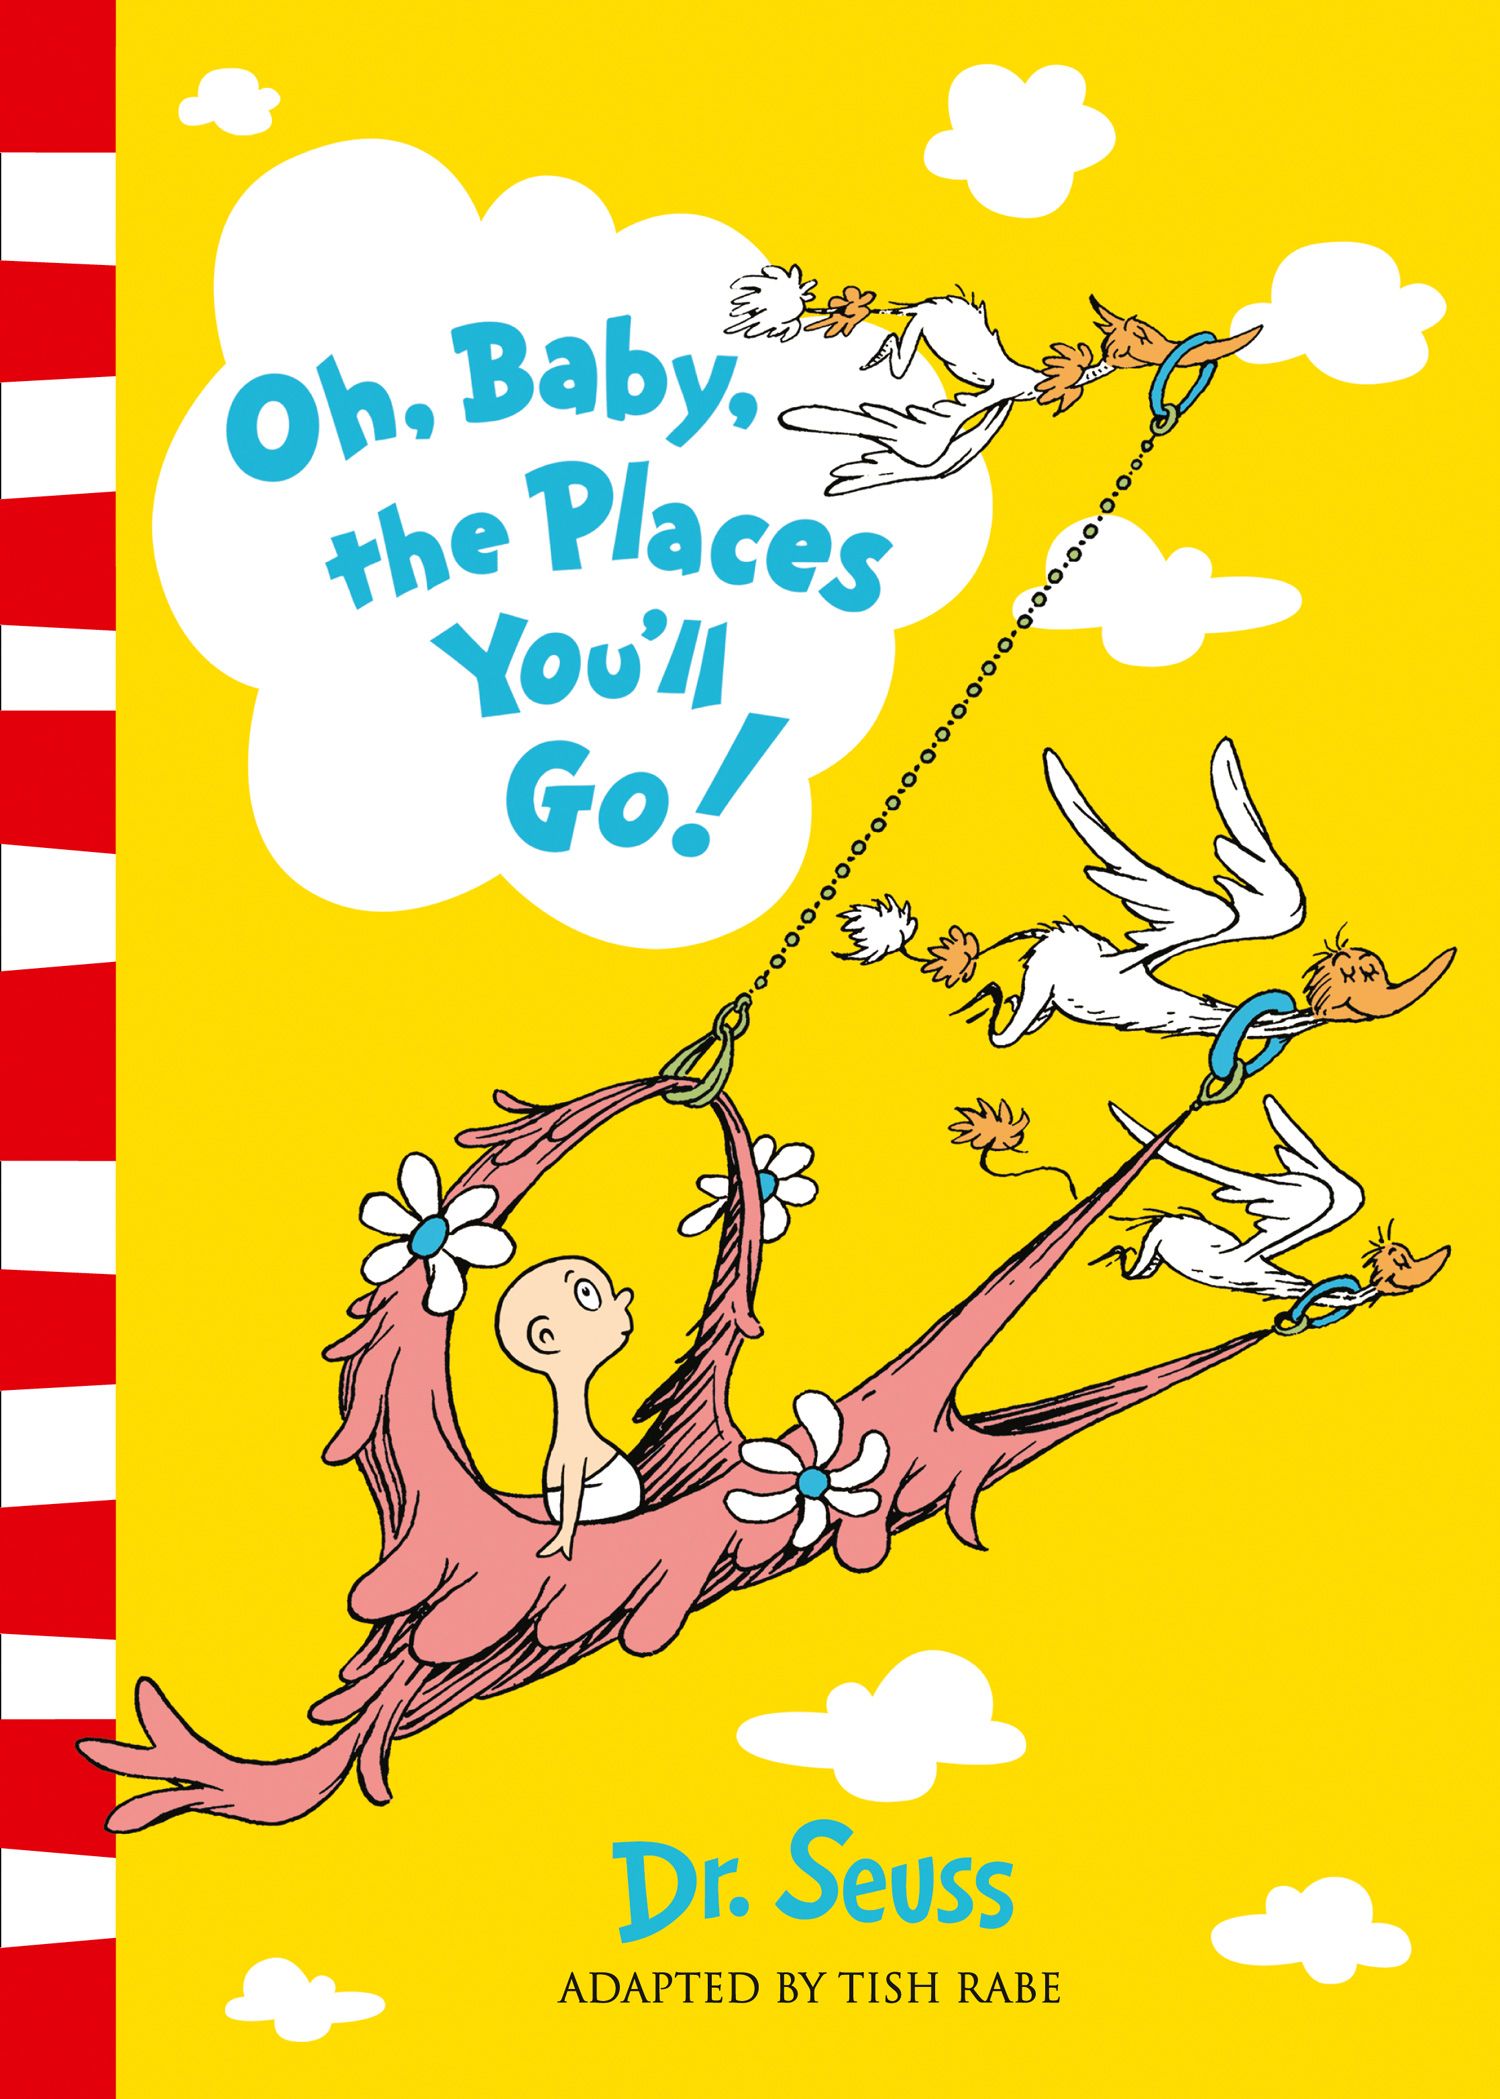 Dr. Seuss - Oh, Baby, The Places You'll Go! (Dr. Seuss) - HarperReach